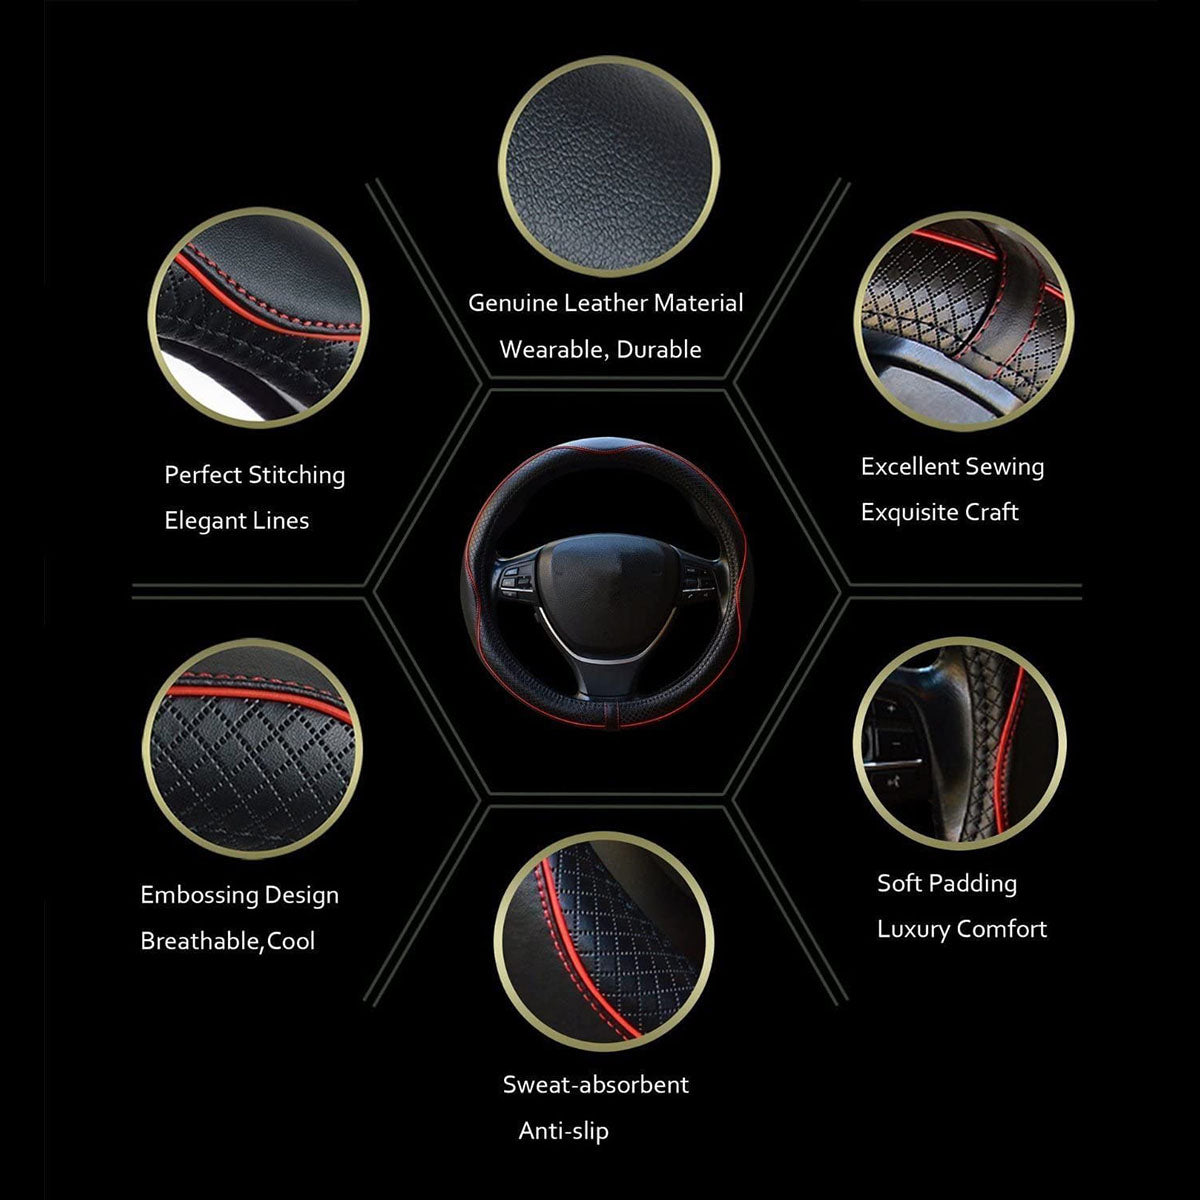 Car Steering Wheel Cover, Custom For Your Cars, Anti-Slip, Safety, Soft, Breathable, Heavy Duty, Thick, Full Surround, Sports Style, Car Accessories KX18990